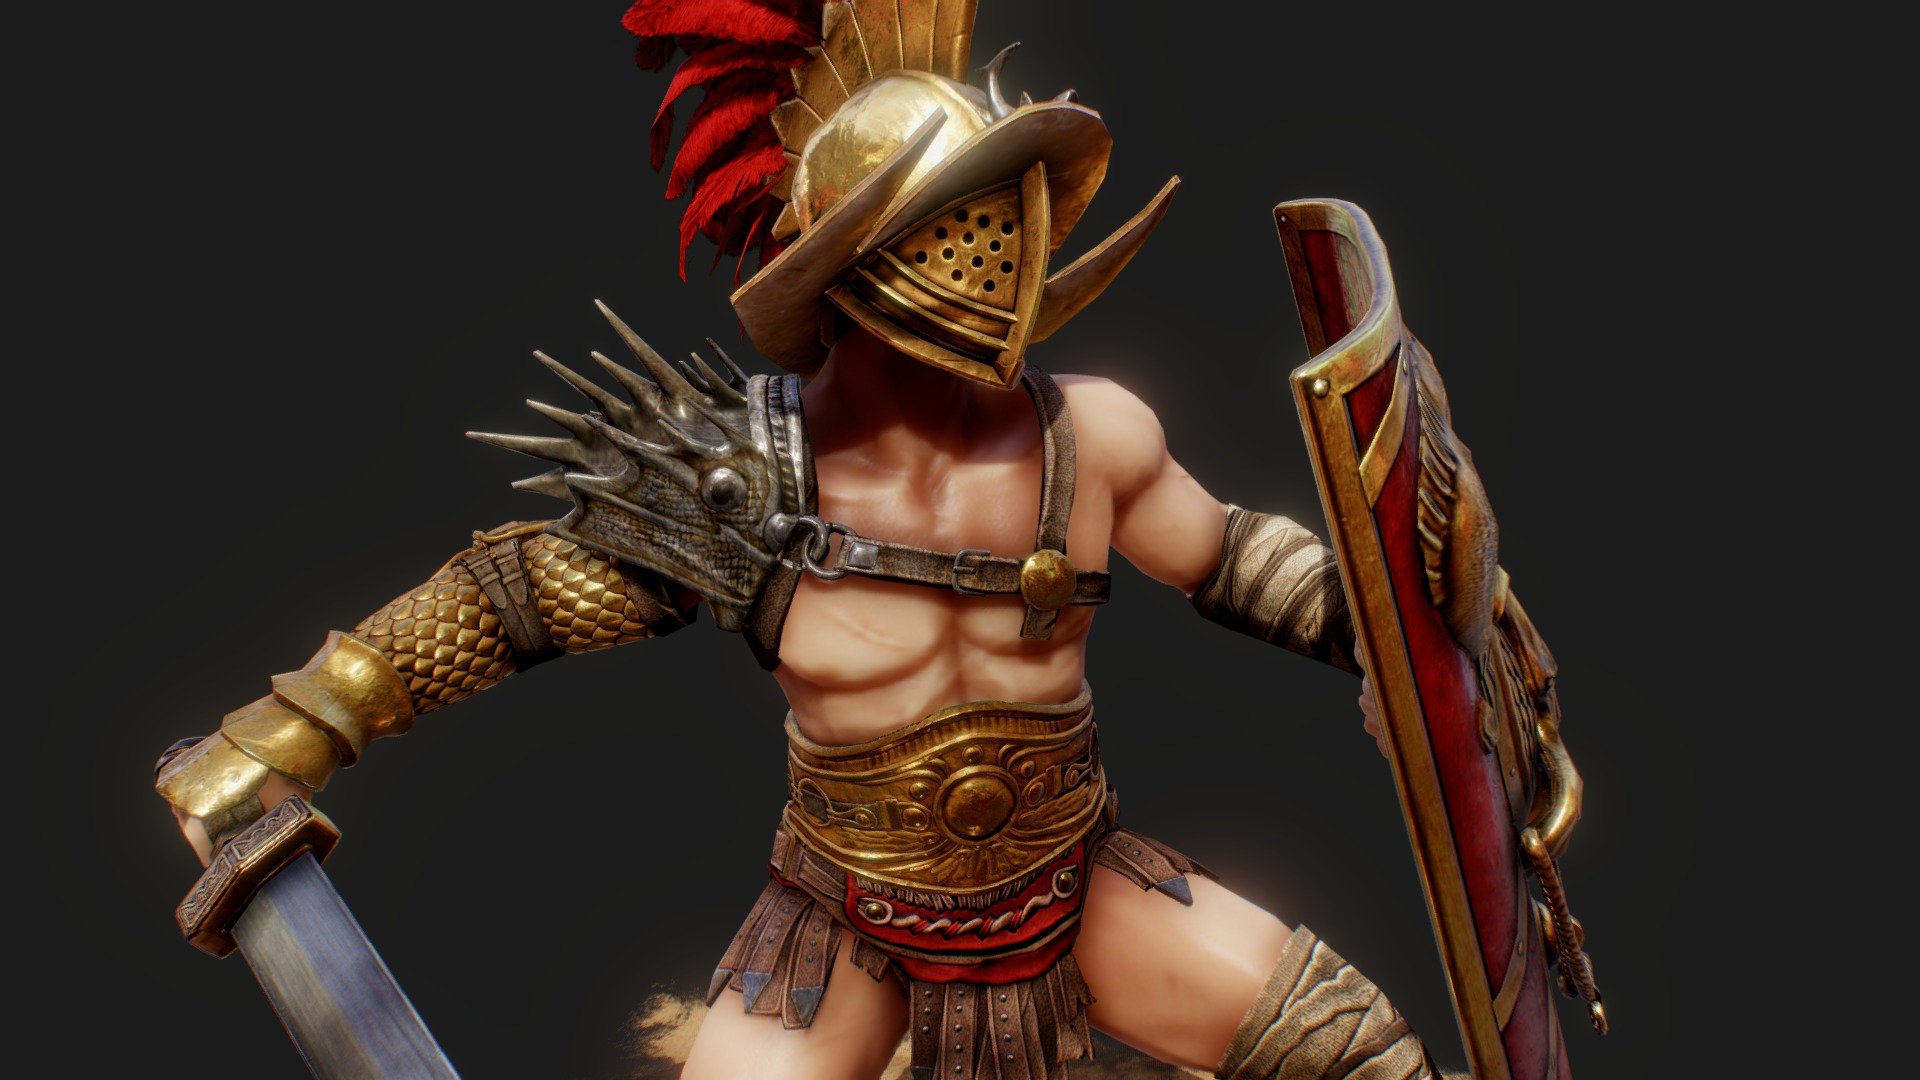 This is one of the characters I modelled for the mobile game Gods of Rome produced by Gameloft&lsquo;s Madrid studio. 



Programs used for production:

3dsMax

ZBrush

Substance Painter

Photoshop - Spartacus - Gods of Rome - 3D model by Thanos Bompotas (@ibizanhound) 3d model